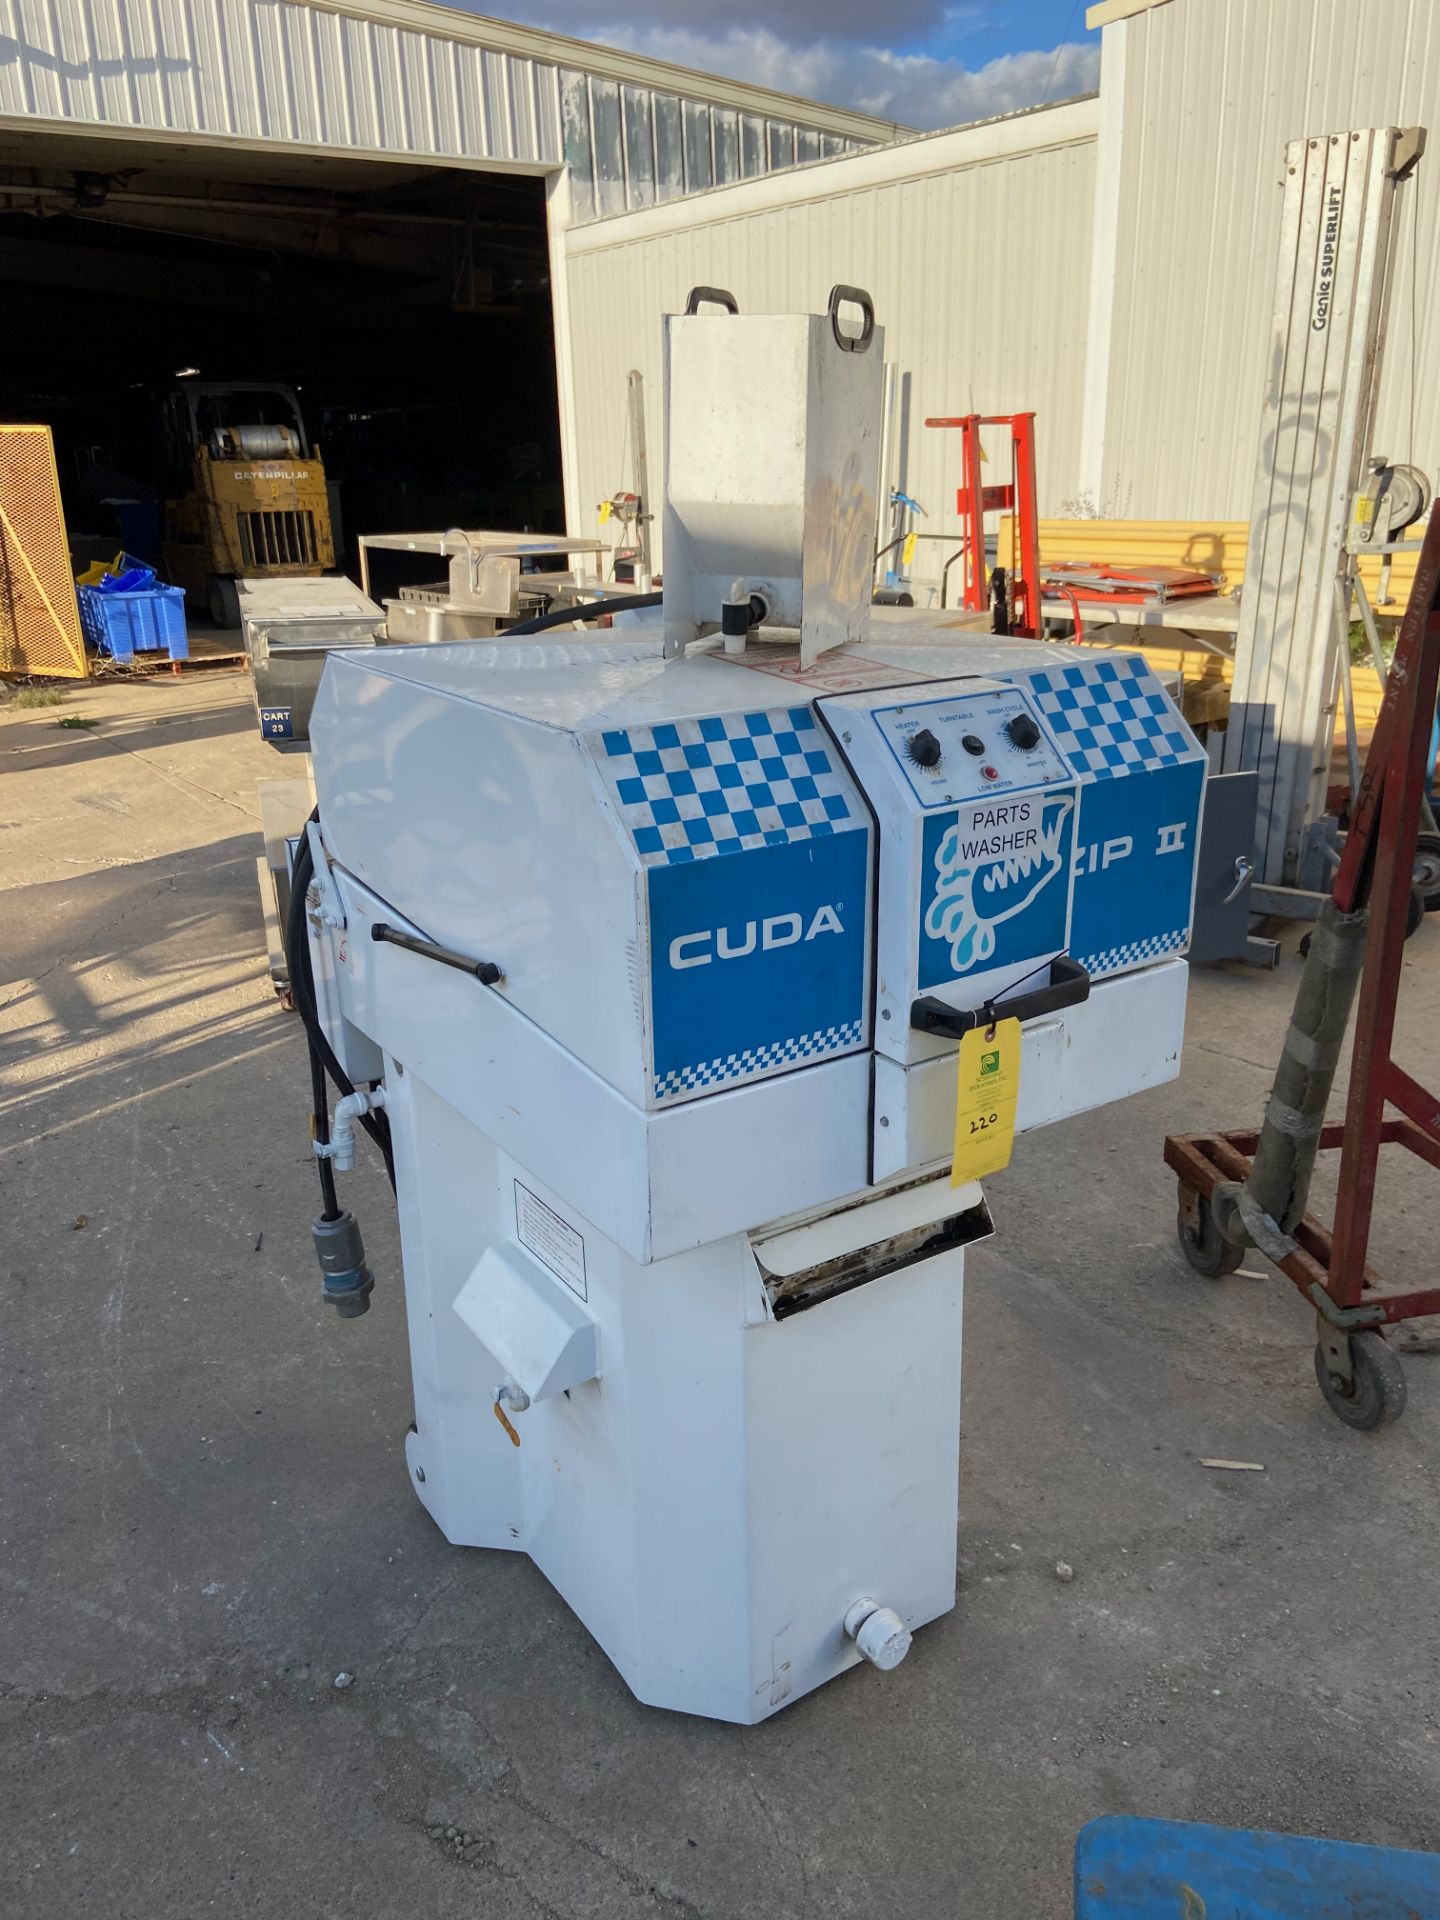 Cuda Parts Washer, Model# H20-2216, Serial# 1005047, 460V, 3 Phase, 60 Hz, (Located in Oelwein, IA) - Image 2 of 6